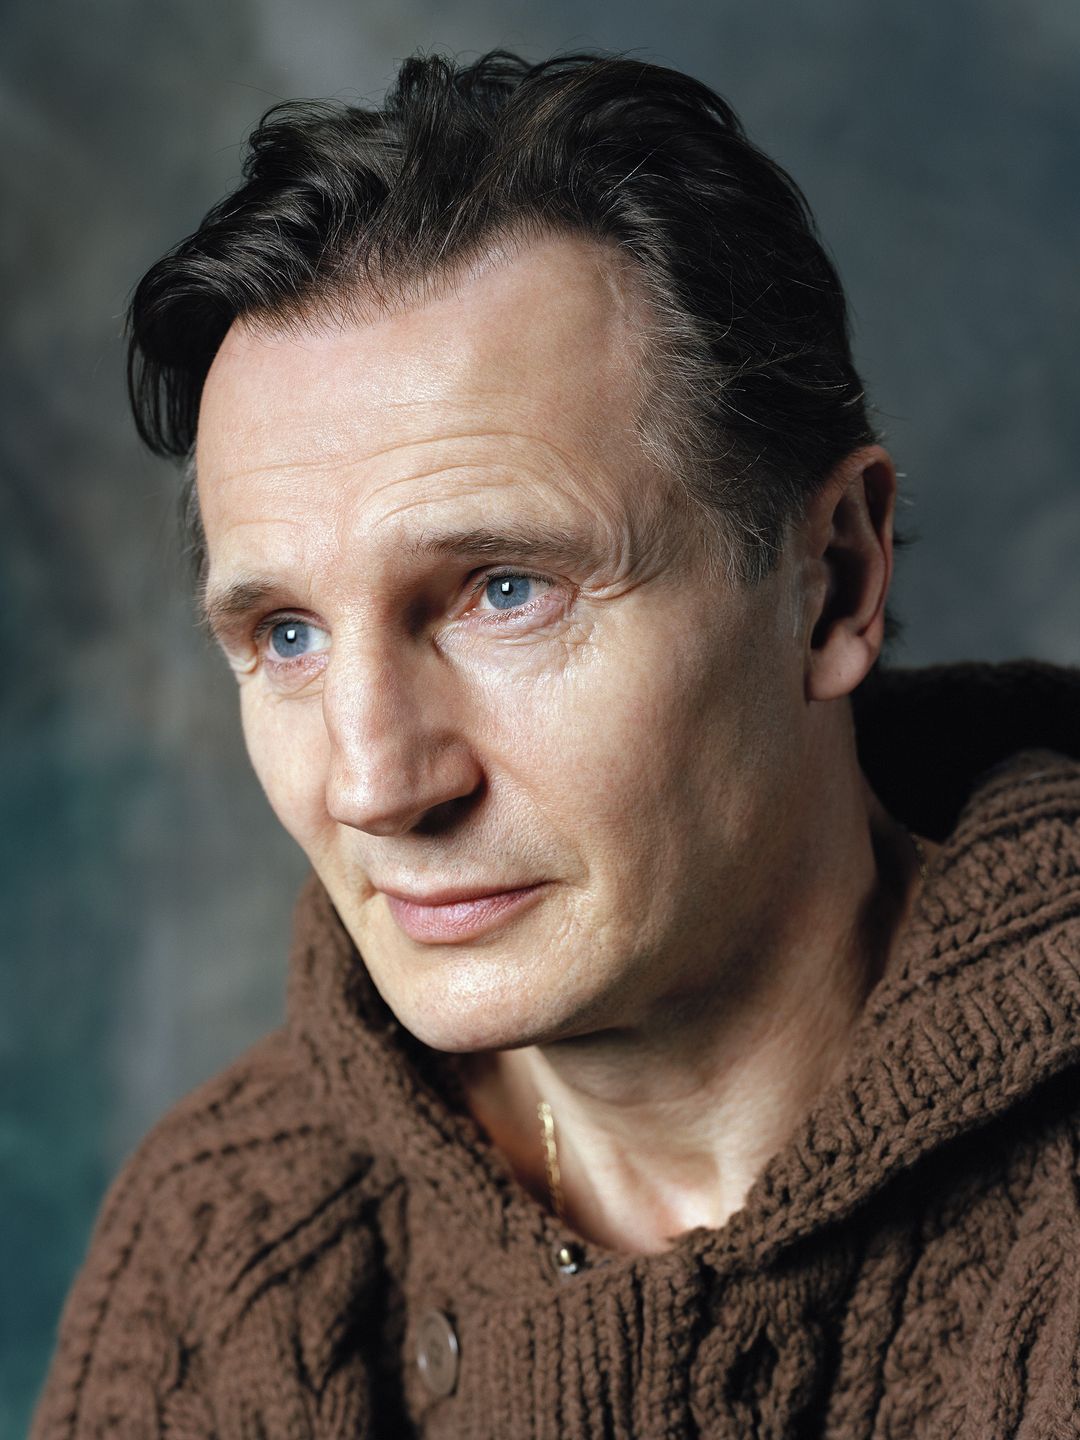 Liam Neeson in his youth